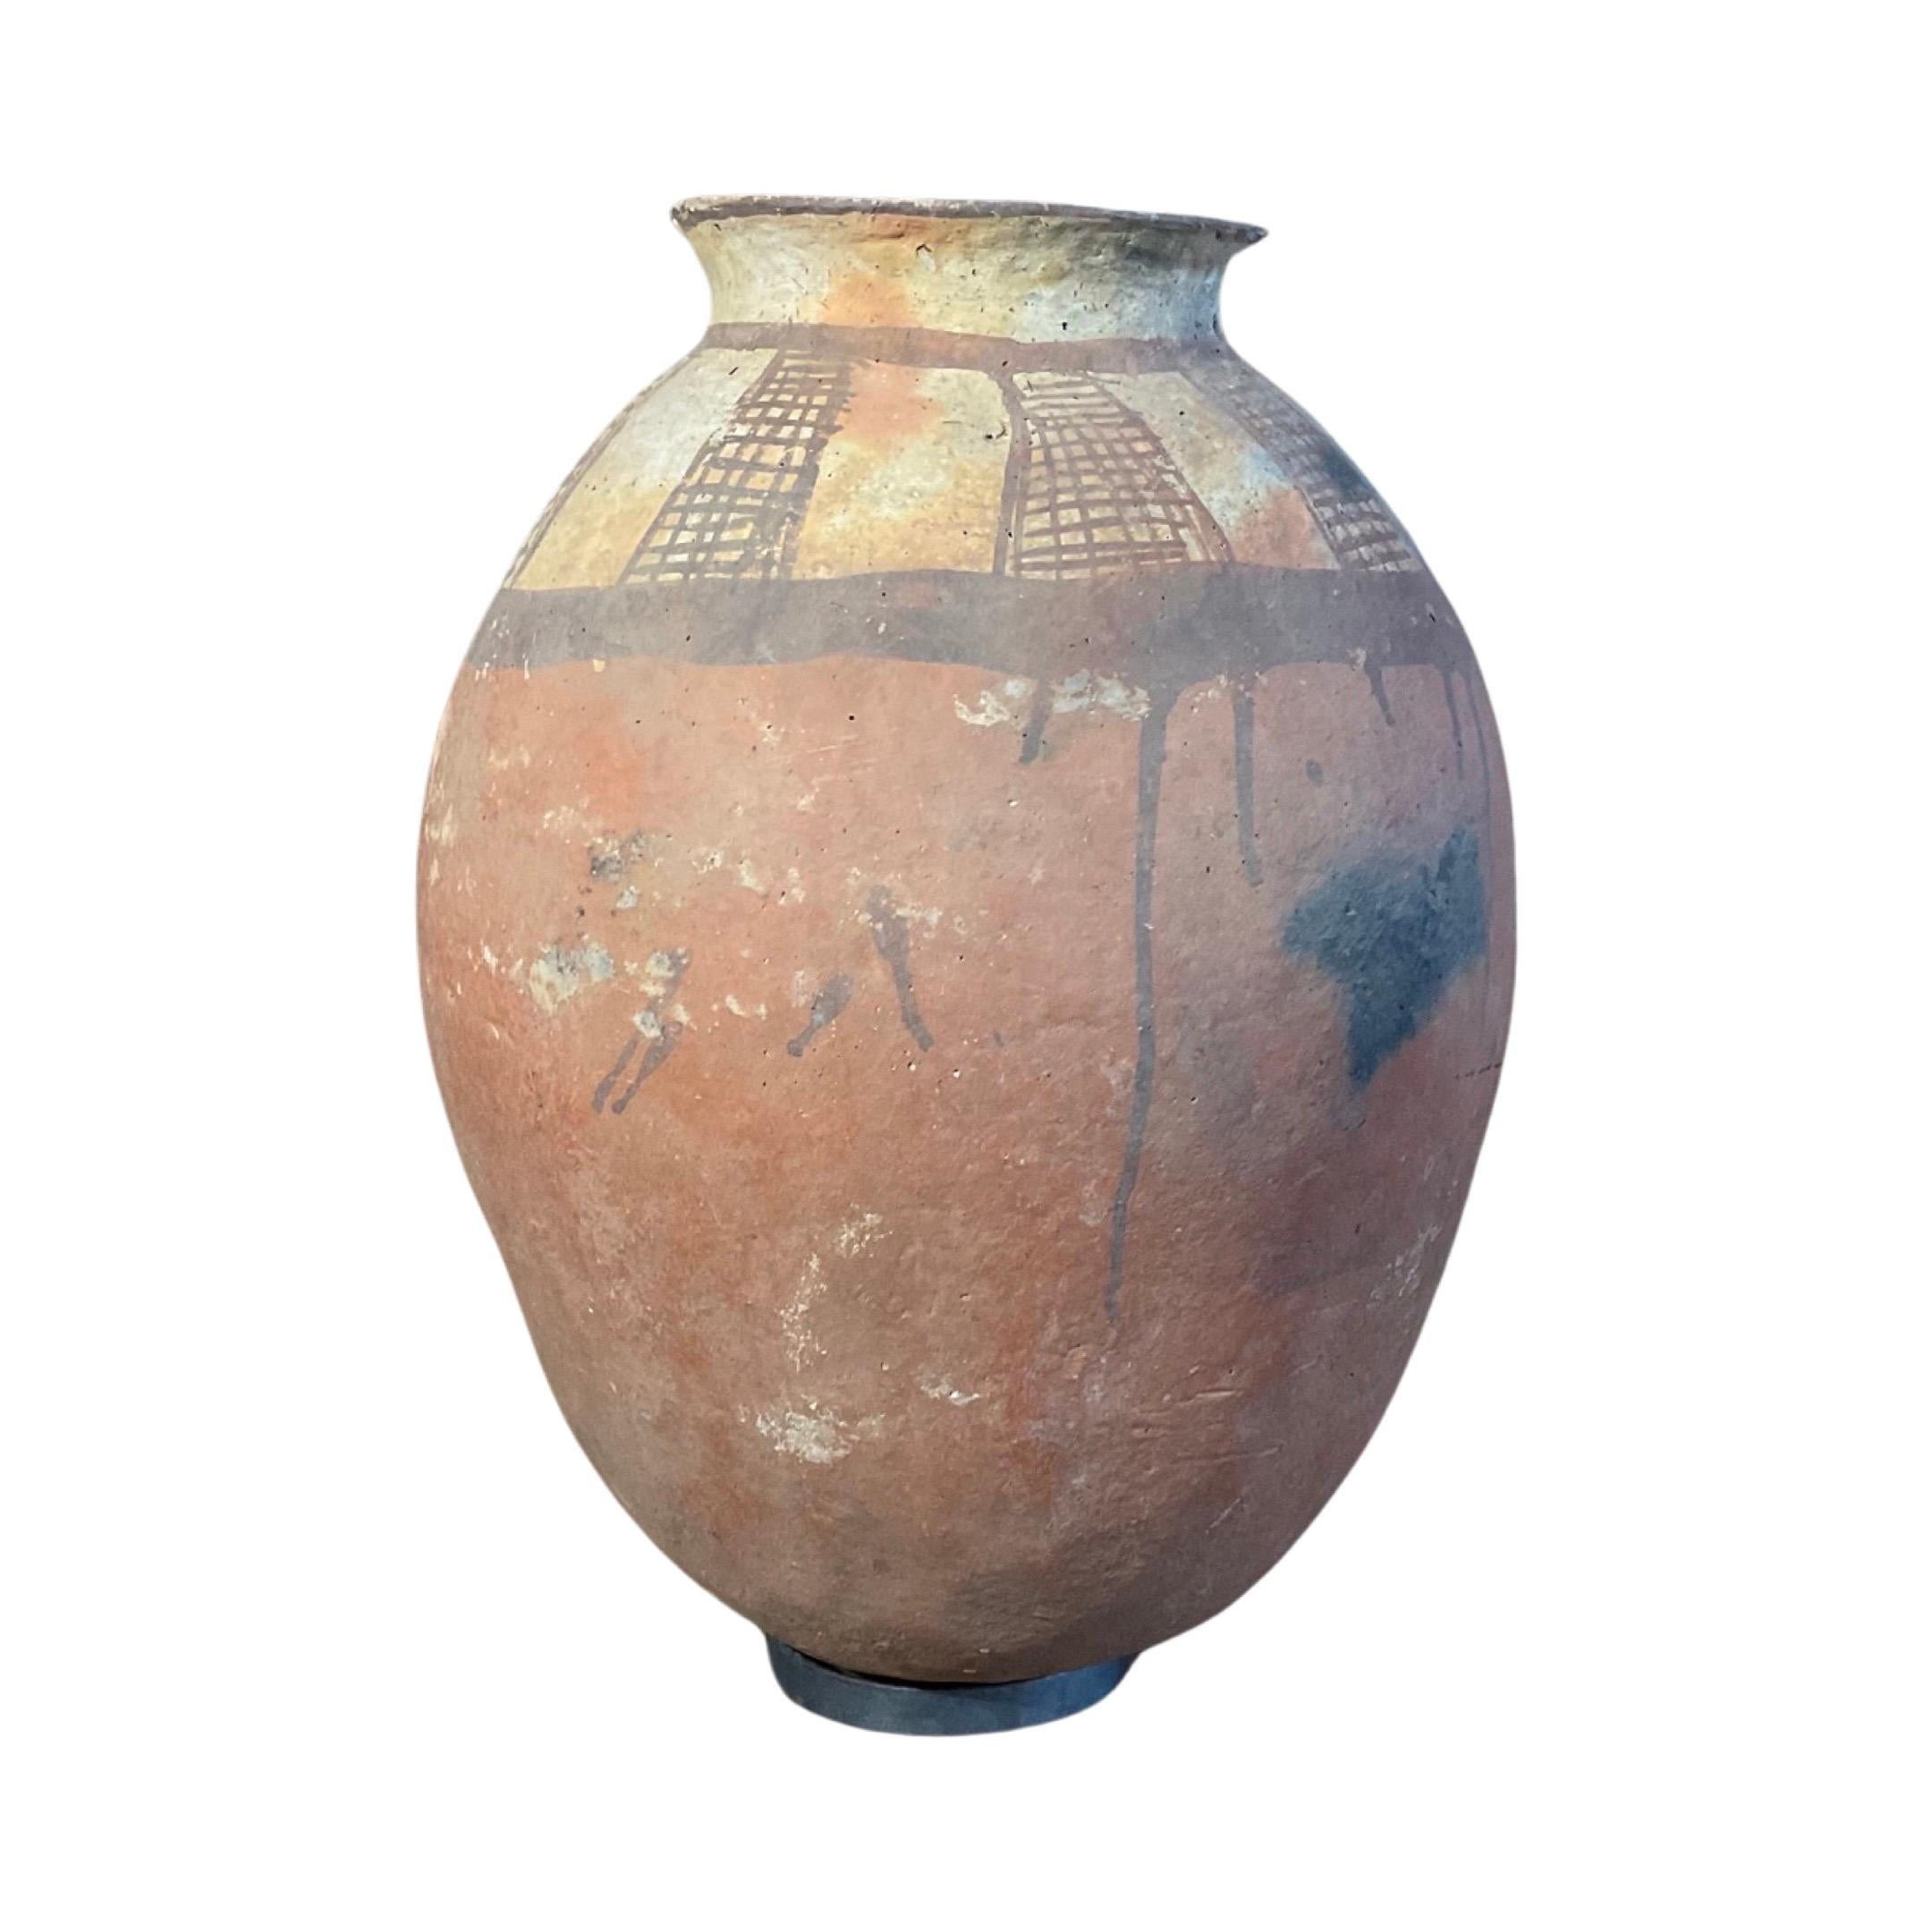 This one-of-a-kind North African terracotta vessel is an antique piece with a round base holder attached for secure support. Its faded and discolored African-style design patterns are sure to make it an eye-catching and unique addition to any